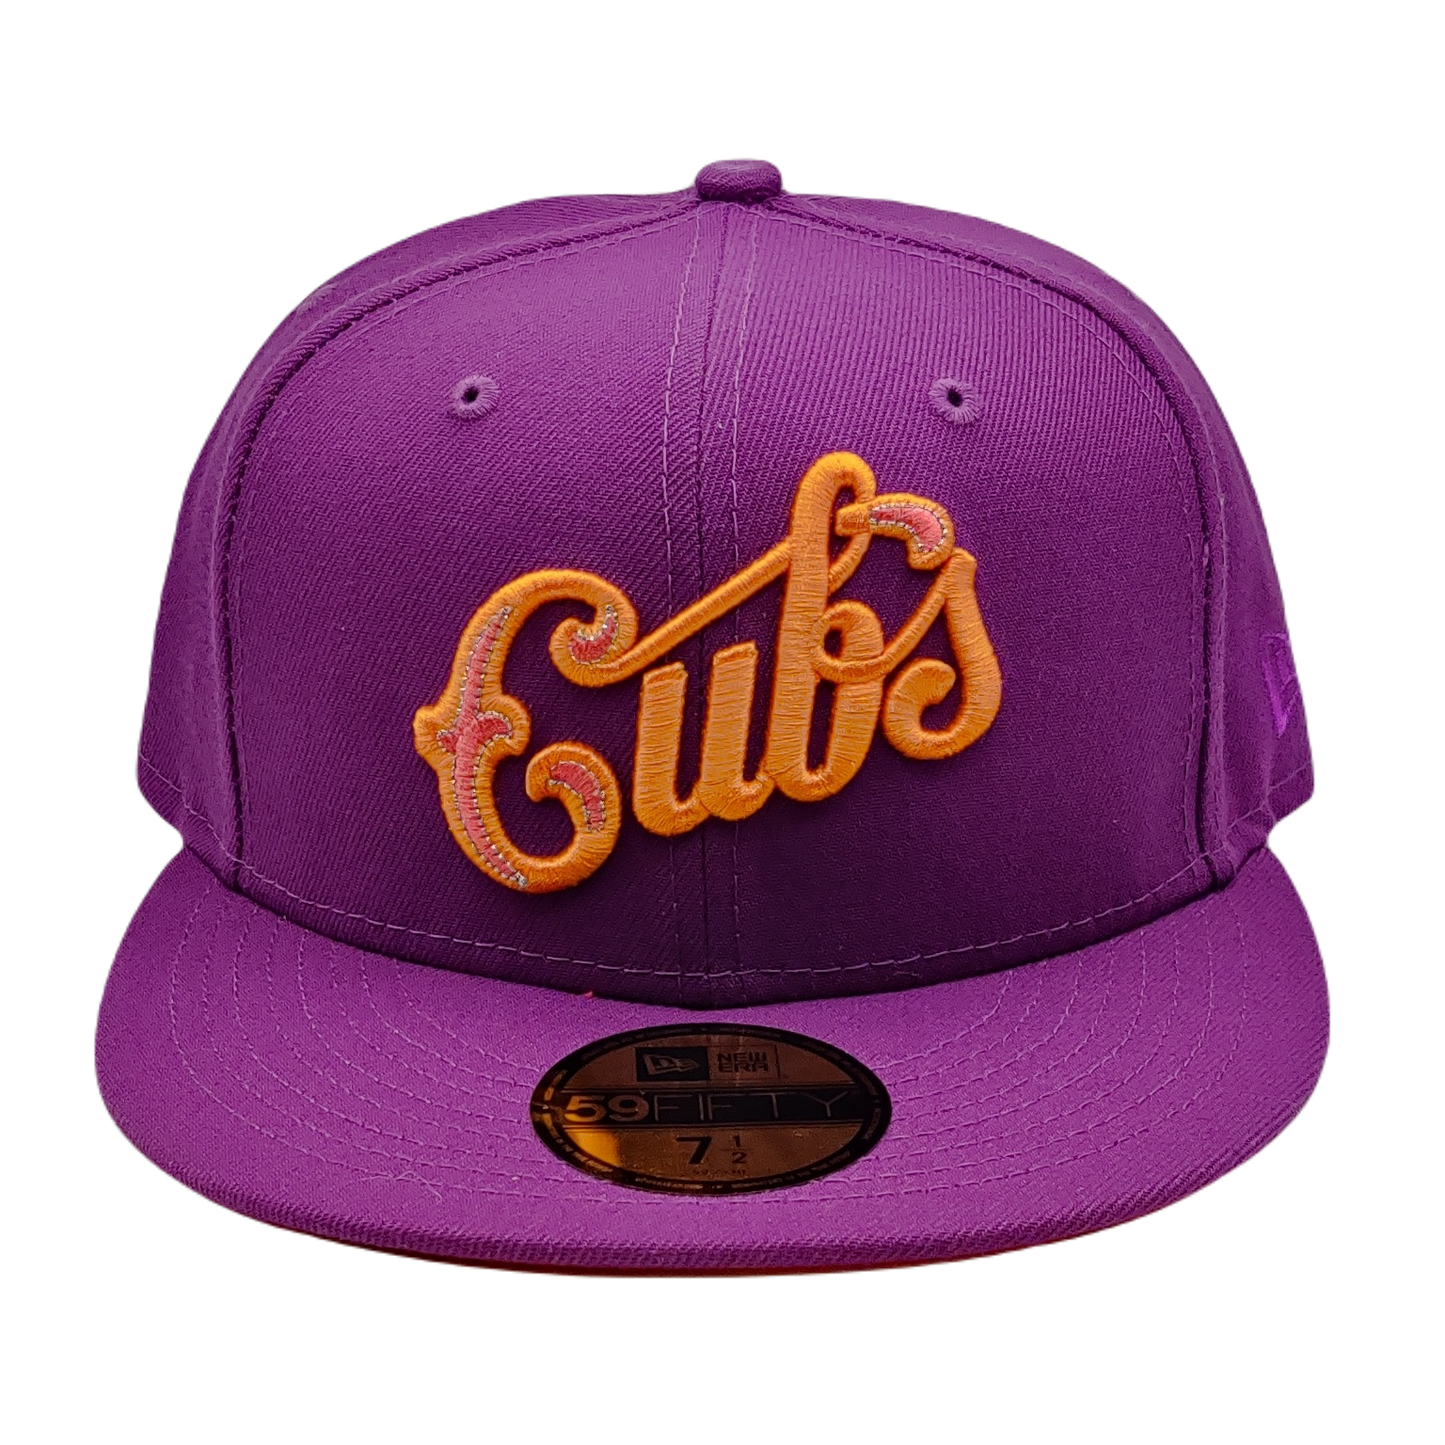 Chicago Cubs Script 59FIFTY Royal Fitted - New Era